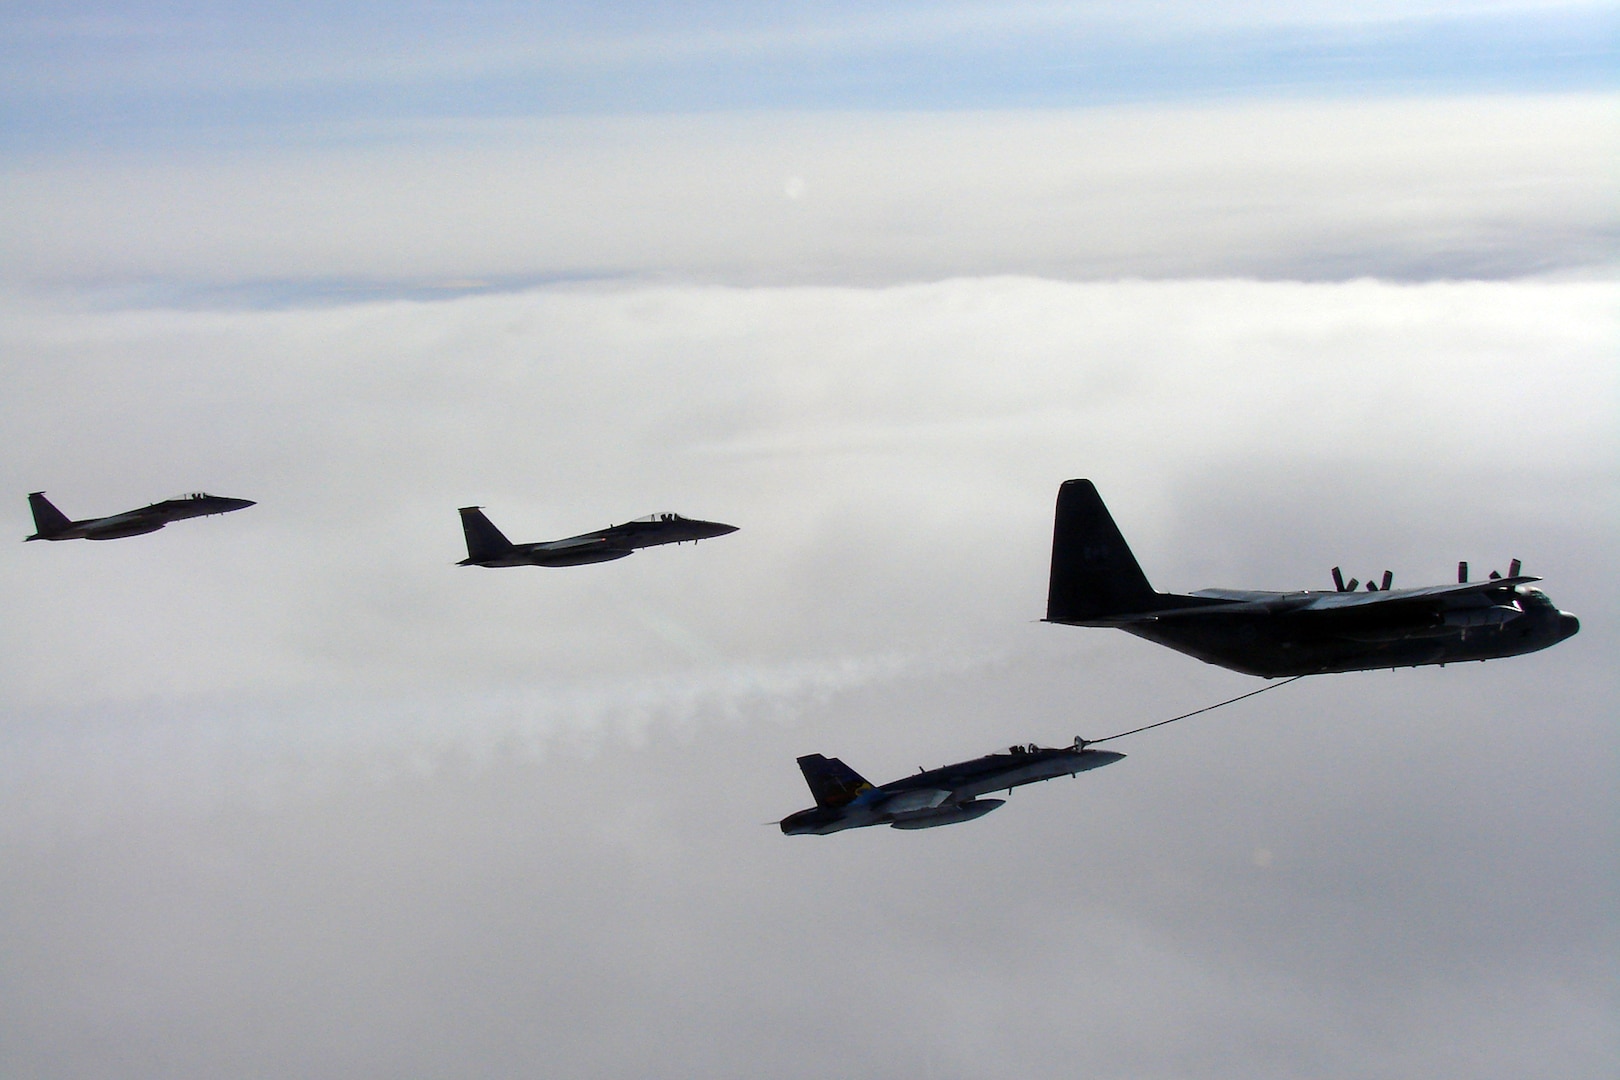 A CF-18 Hornet tops up its tanks from a CC-130T Hercules, both from the Canadian North American Aerospace Defense Command Region, while two F-15 Eagles from Elmendorf Air Force Base, Alaska, fly nearby. The aircraft were in the Canadian north in March 2007 to practice joint long-range detection missions and other NORAD procedures.